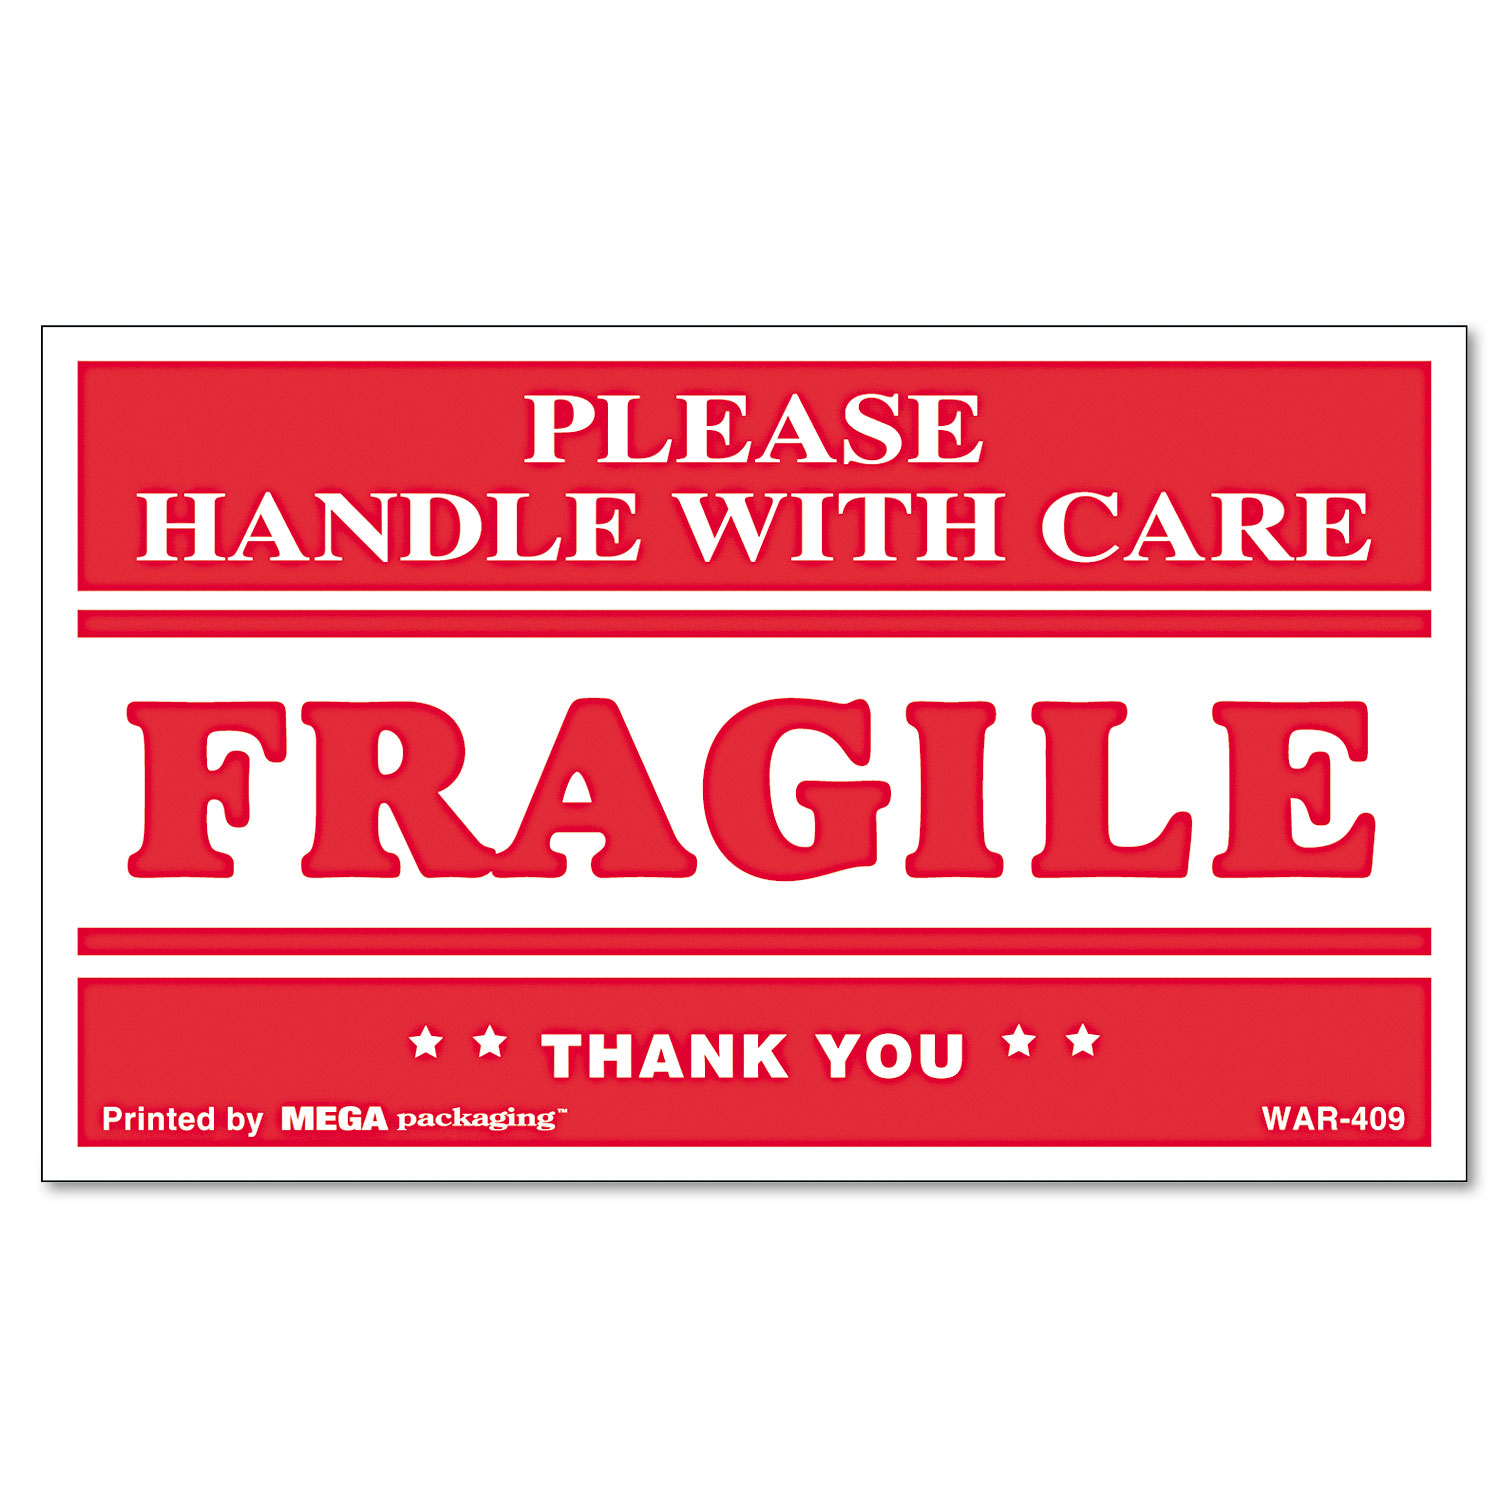 FRAGILE HANDLE WITH CARE Self-Adhesive Shipping Labels, 3 x 5, 500/Roll